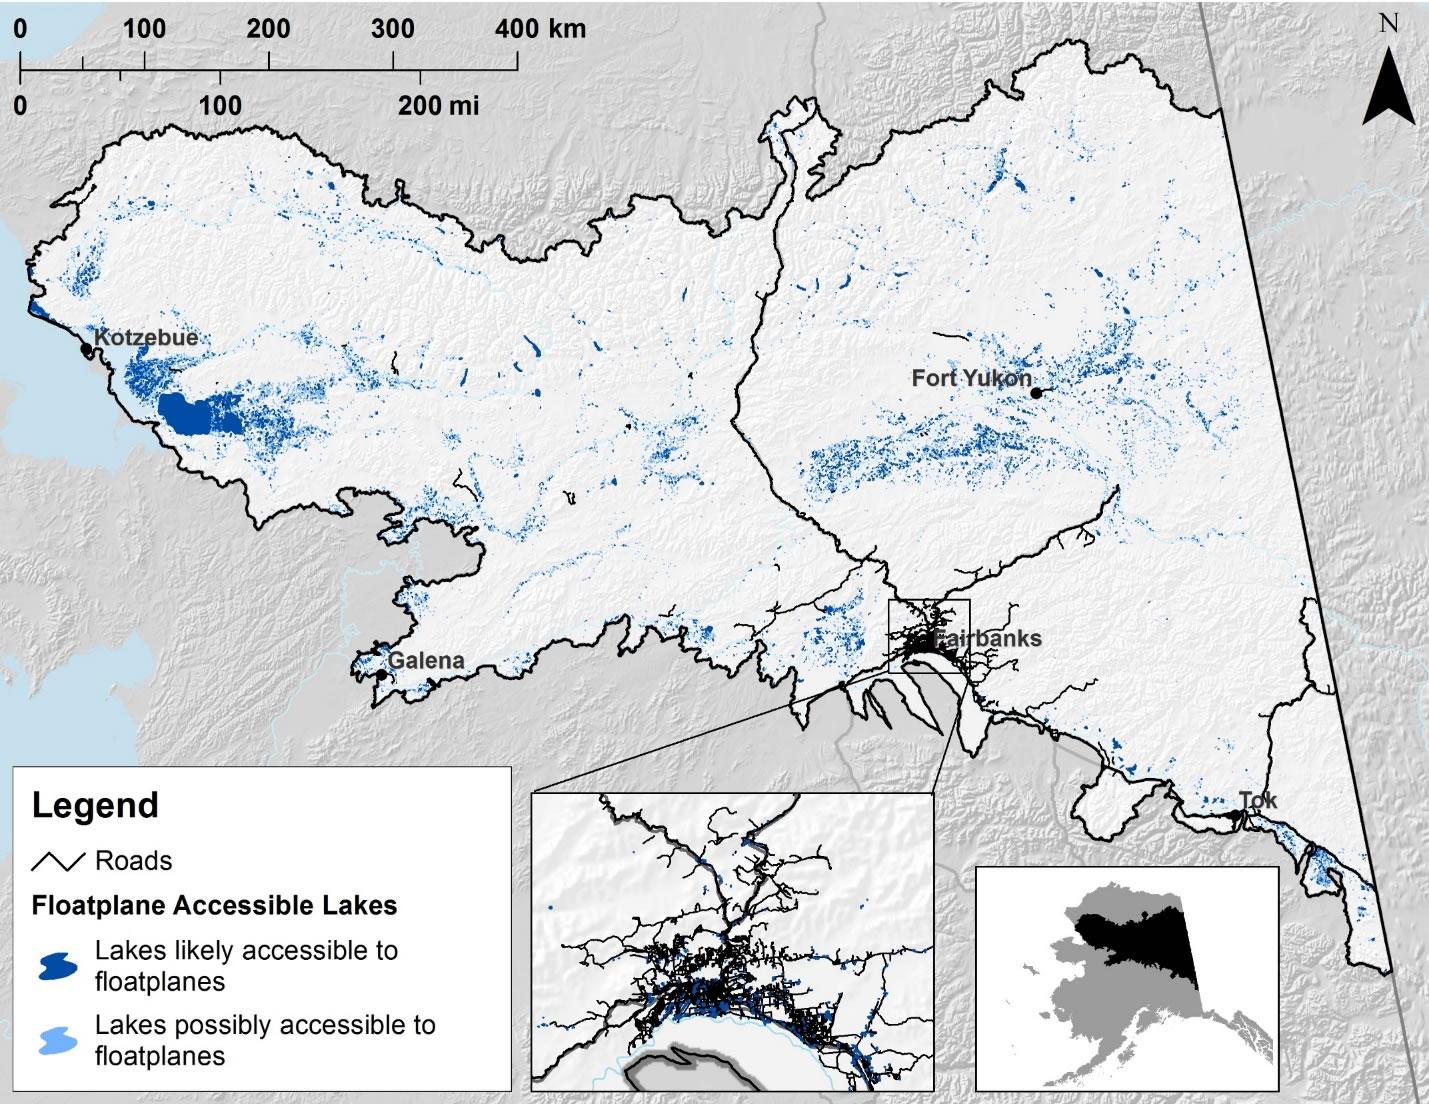 Floatplane accessible lakes susceptible to Elodea introduction